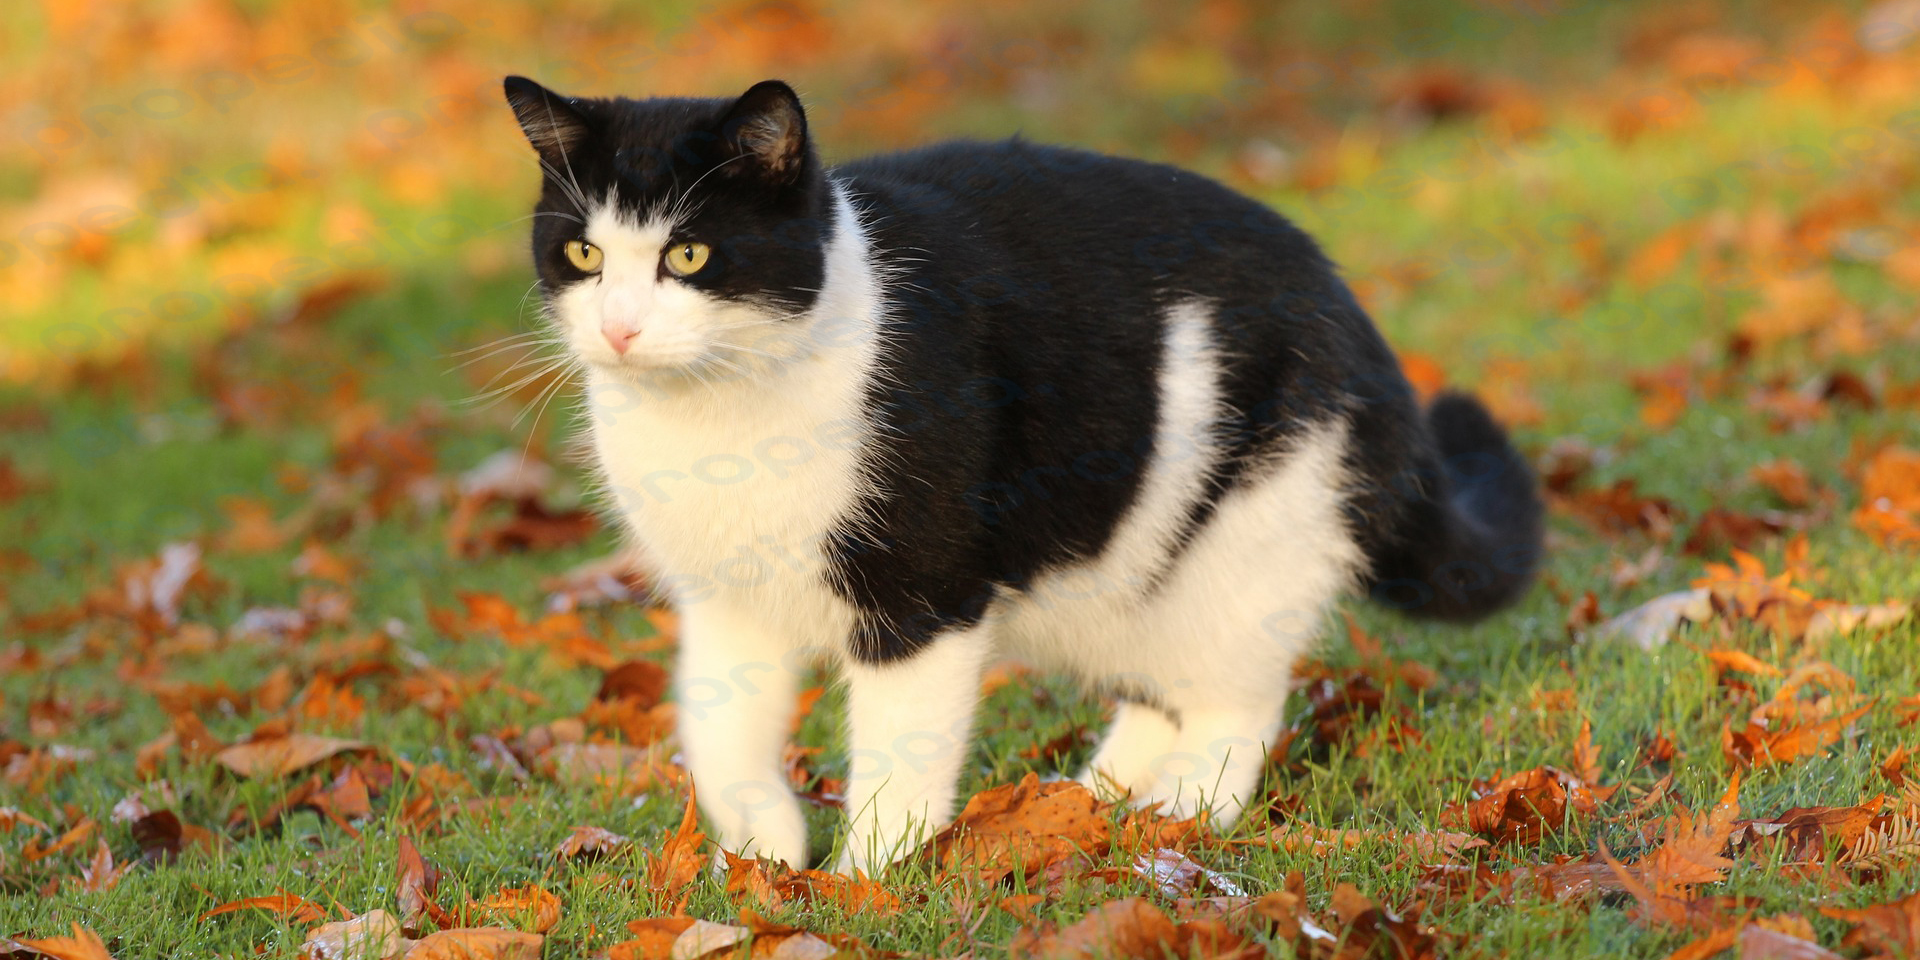 Black and white cat color